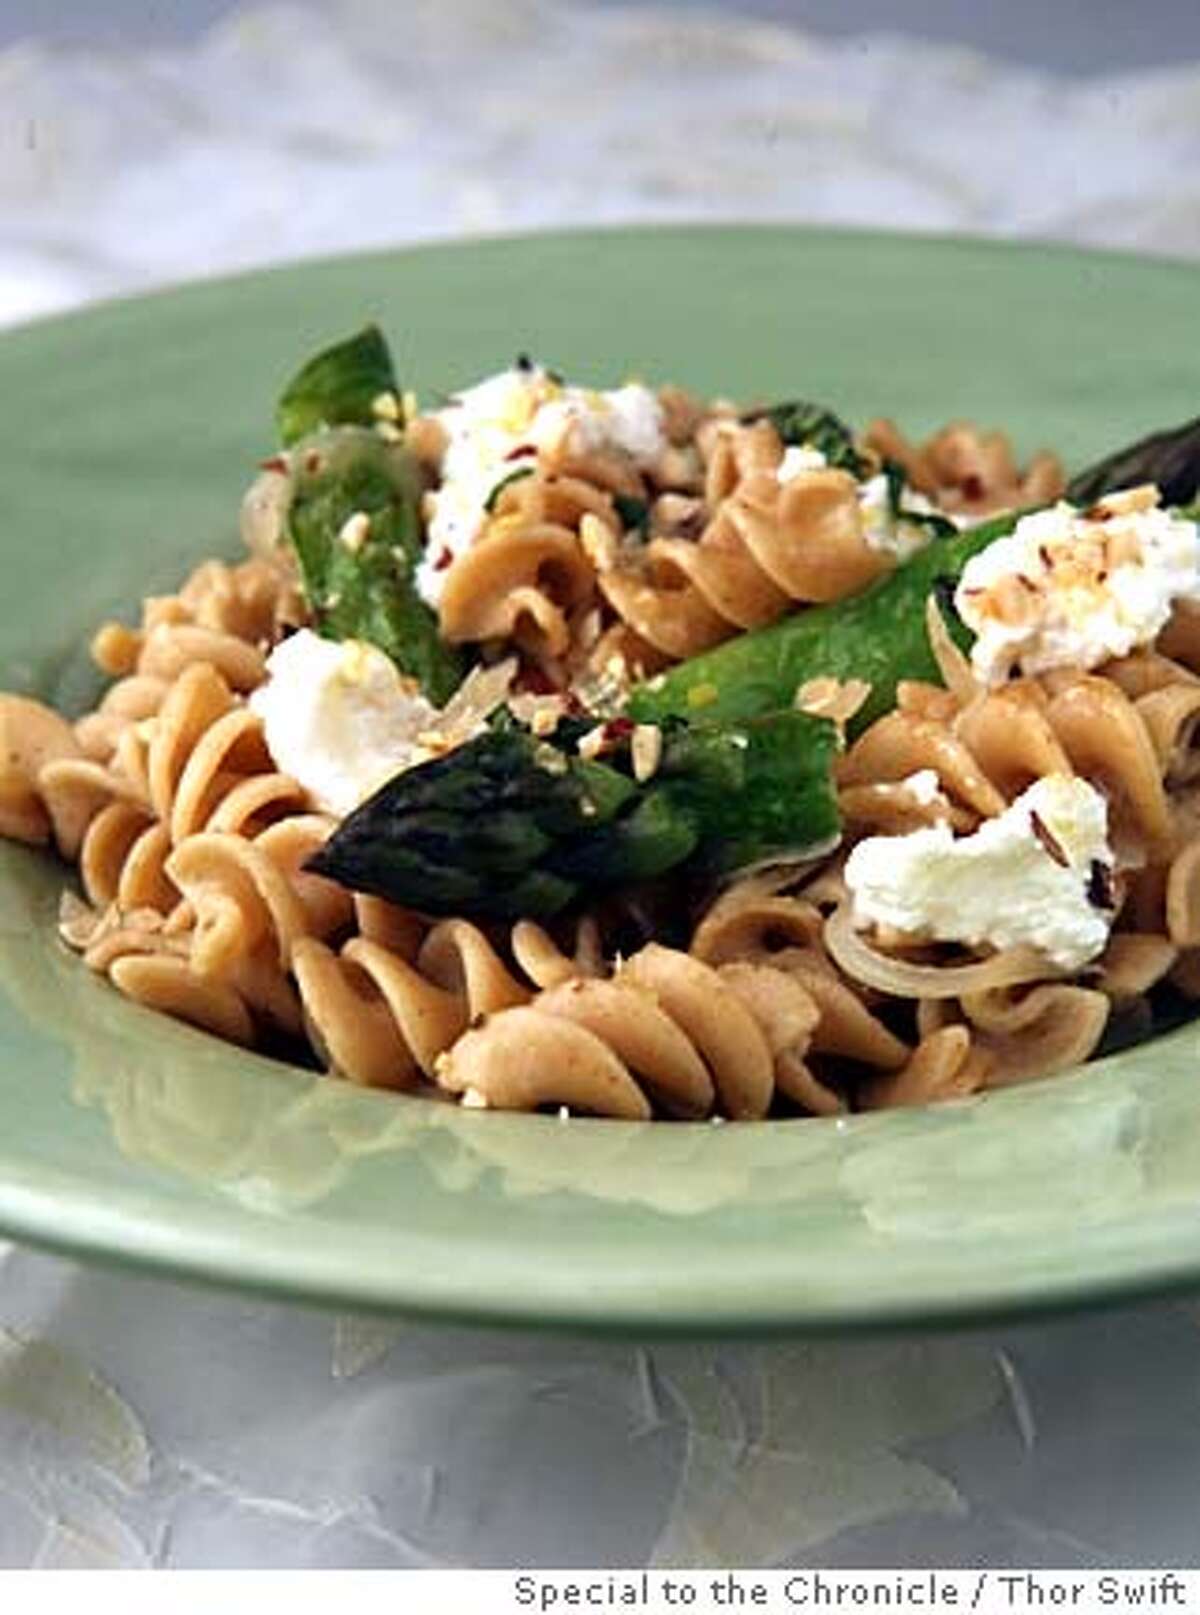 Pasta with sugar snap peas, asparagus ricotta and brown butter, photographed Thursday, April 10, 2008 at the San Francisco Chronicle studio. Thor Swift For The San Francisco Chronicle Styled by Maryann Smitt Ran on: 04-30-2008